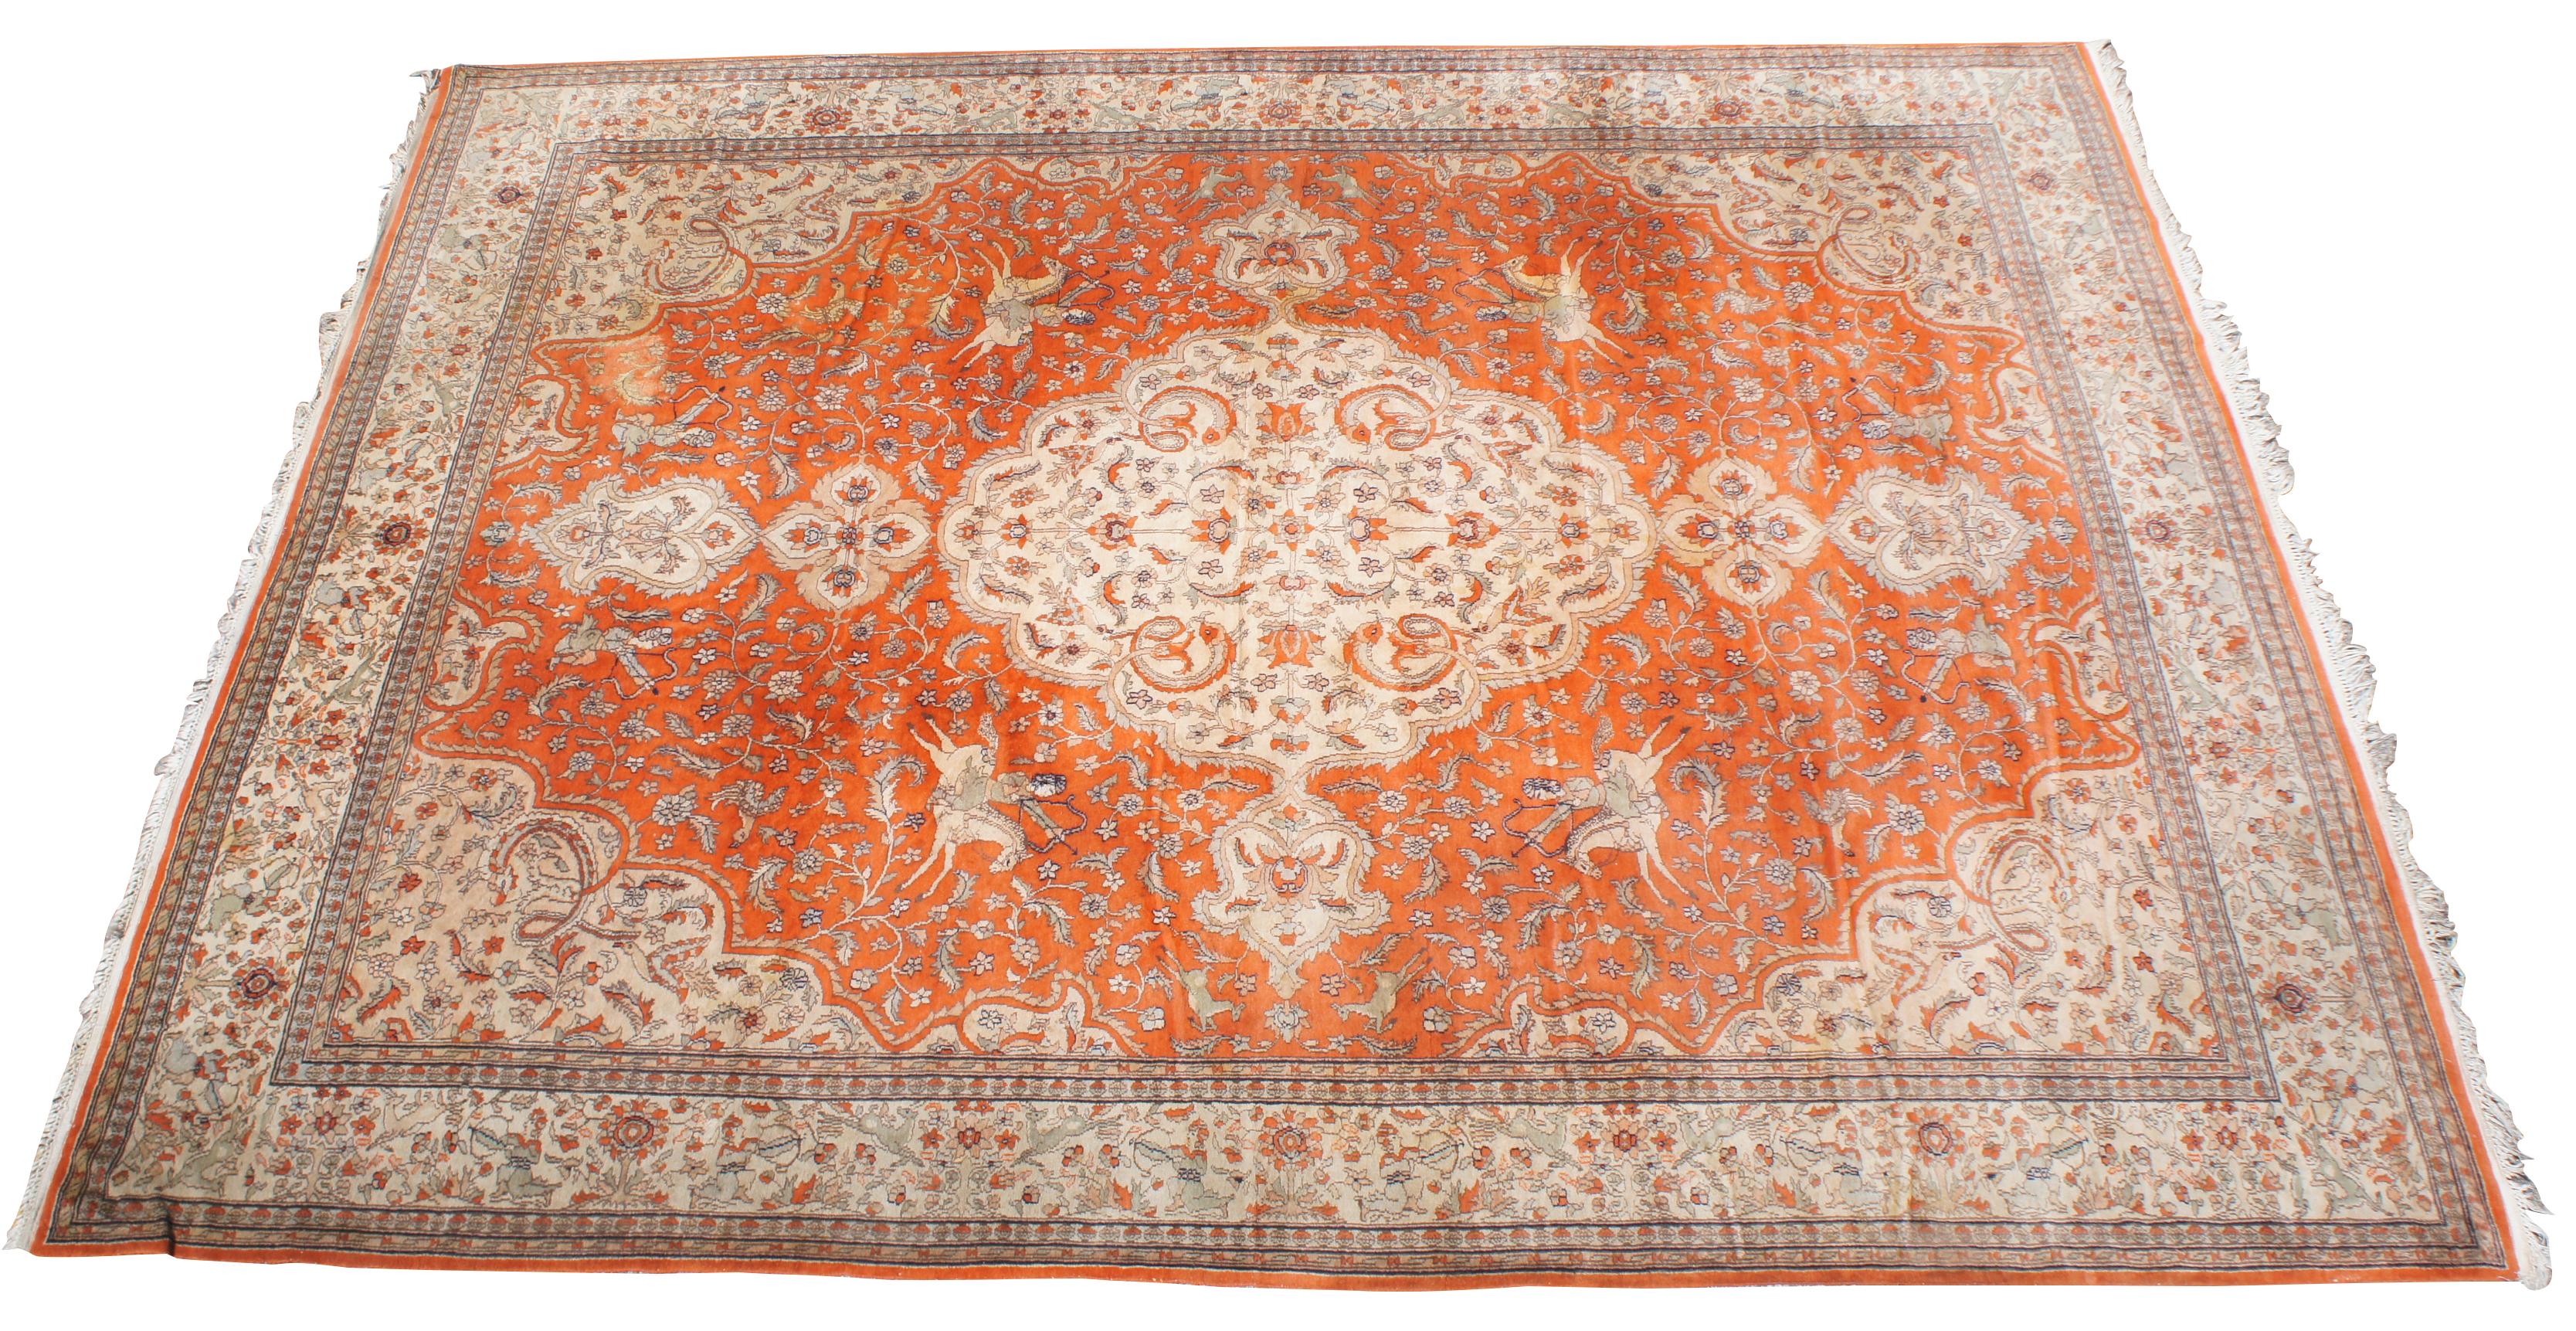 Antique hand knotted Tabriz Indo Persian area rug with a hunting scene on an orange field or forest. Features hunters shooting antelope or deer with arrows on horses and by foot. The center medallion and boarder features cream or tan floral motifs,